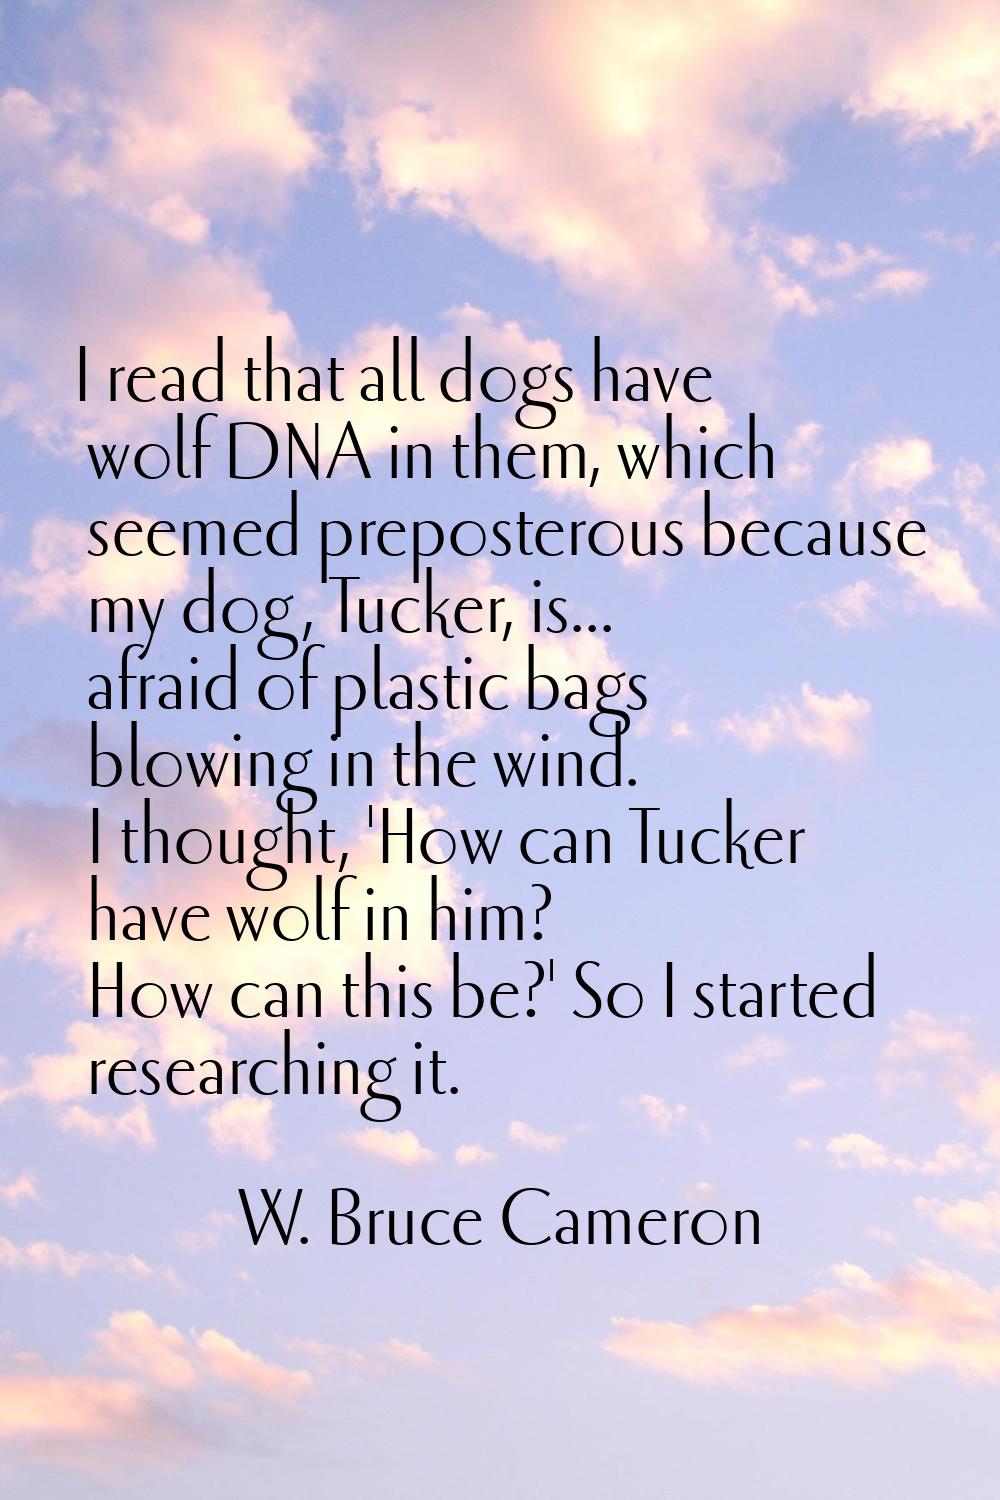 I read that all dogs have wolf DNA in them, which seemed preposterous because my dog, Tucker, is...